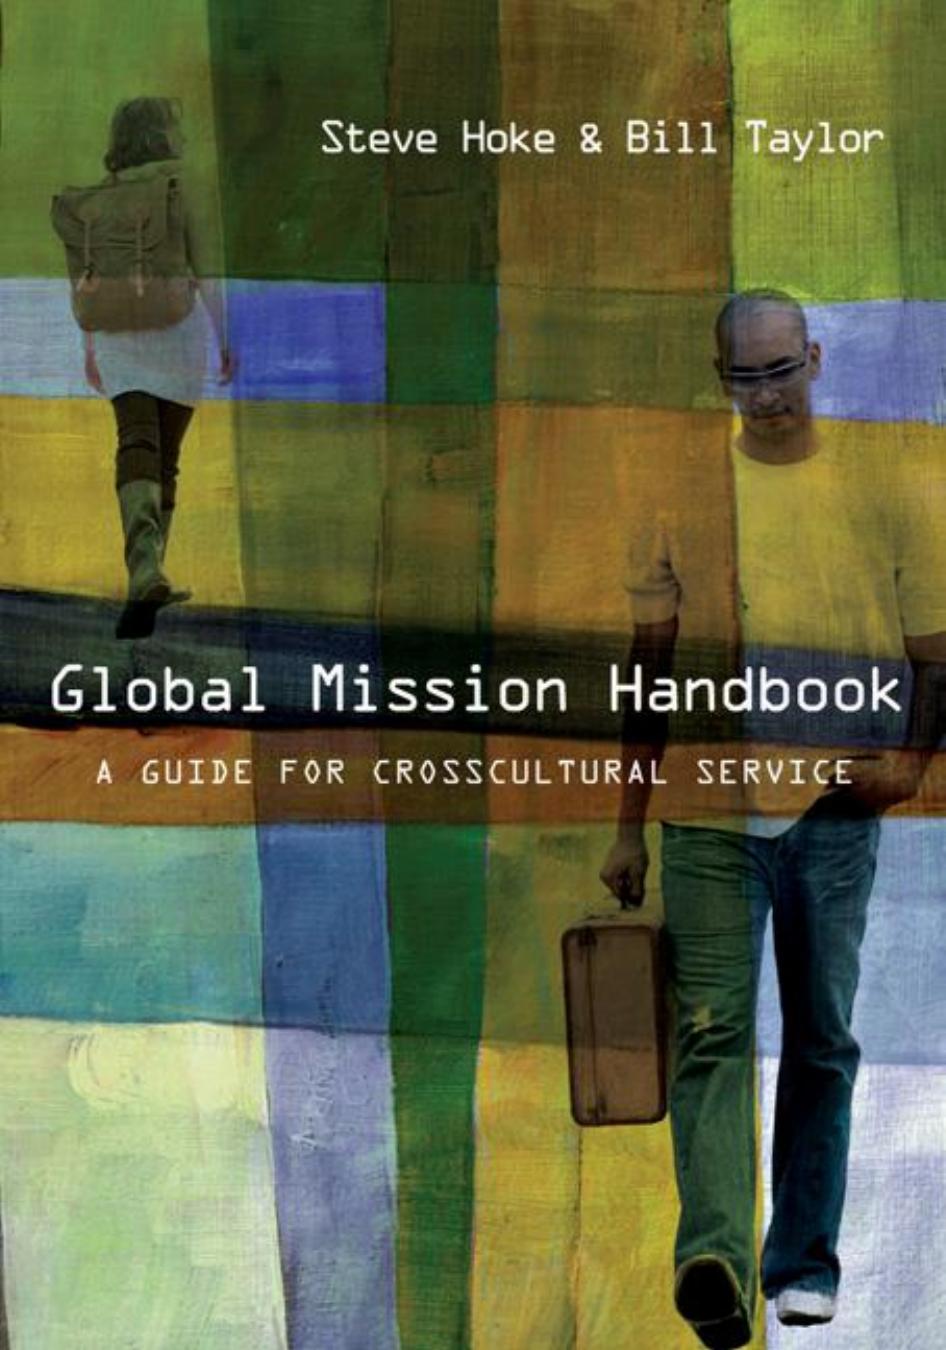 Global Mission Handbook : A Guide for Crosscultural Service by Steve Hoke; Bill Taylor